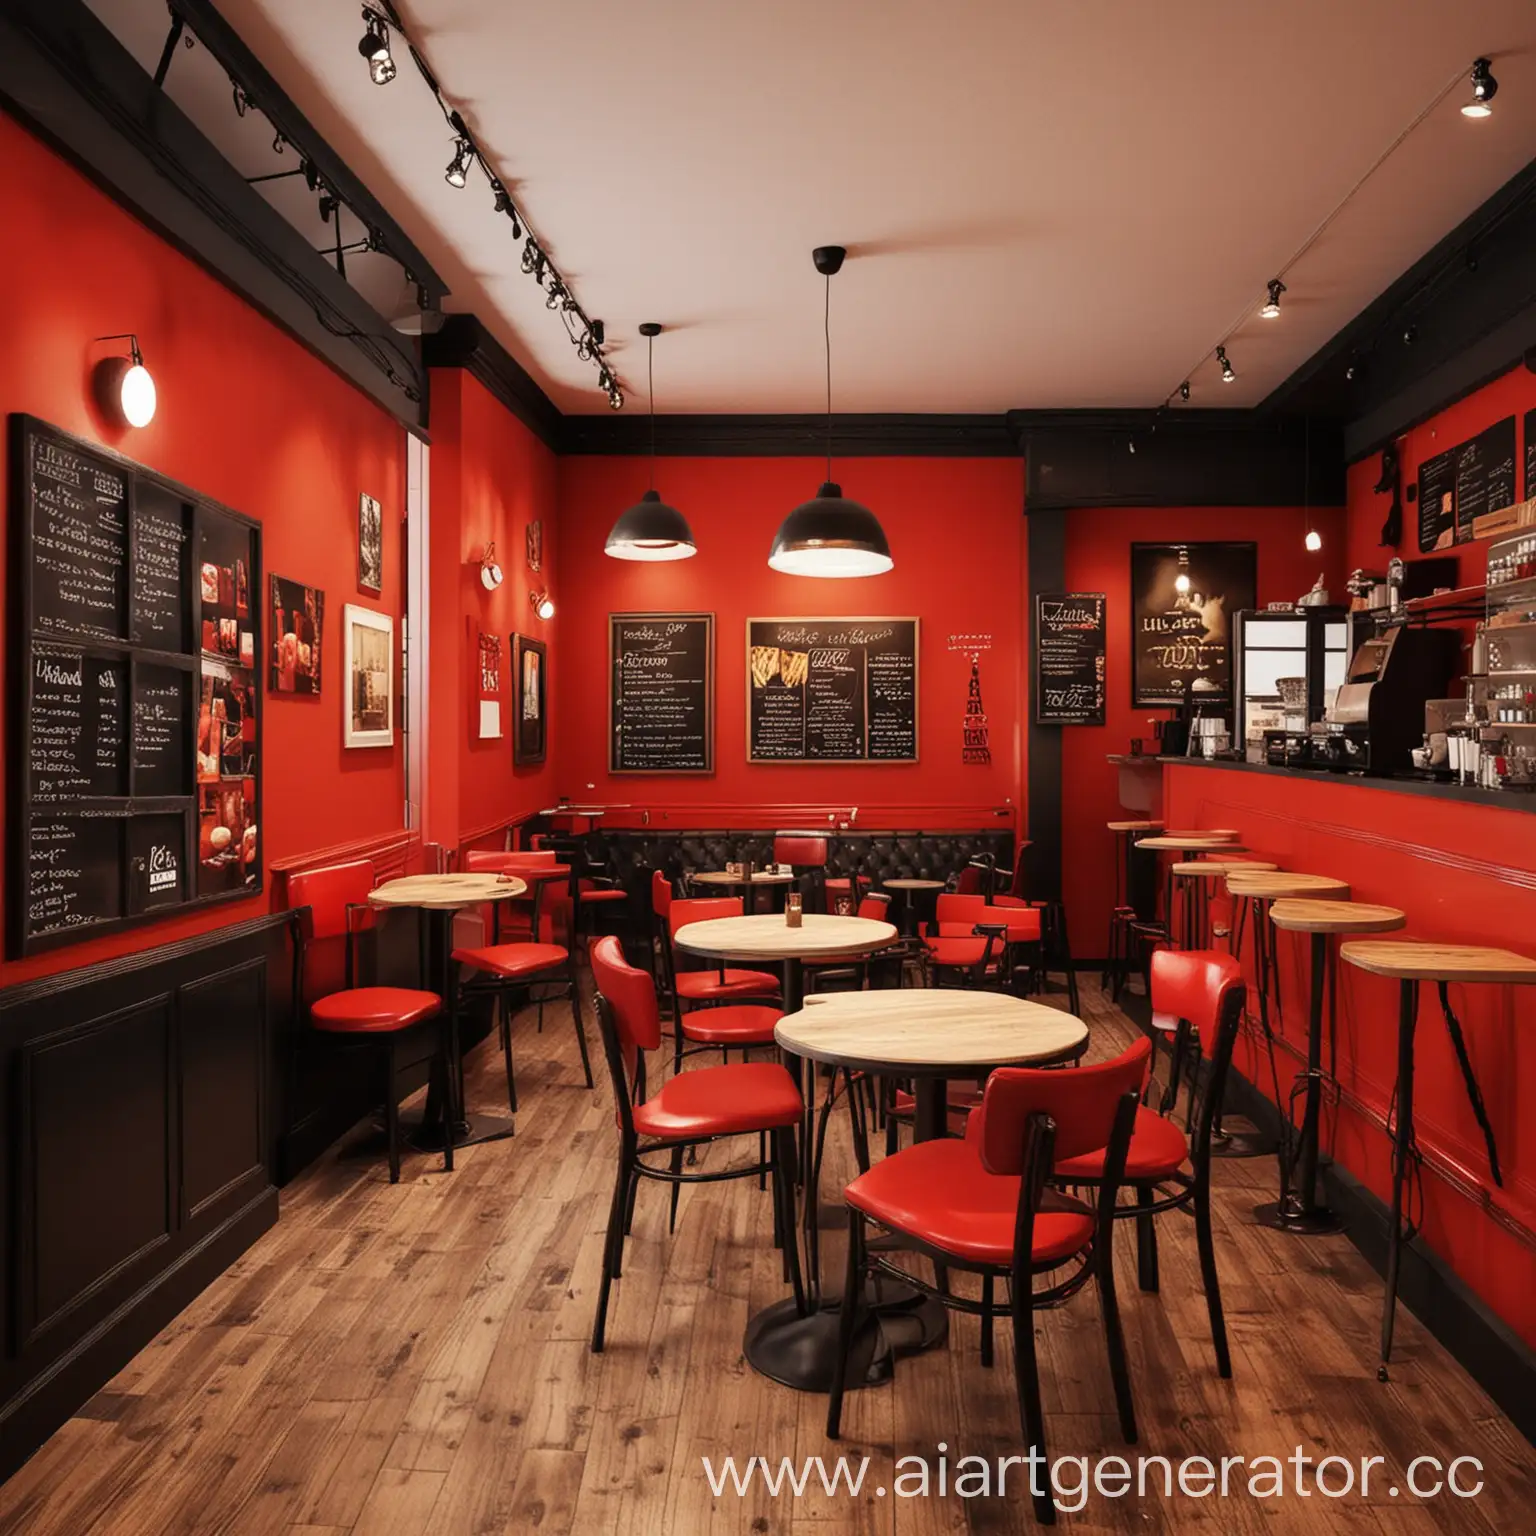 Modern-Cafe-Interior-Design-in-Red-Black-and-Yellow-Colors